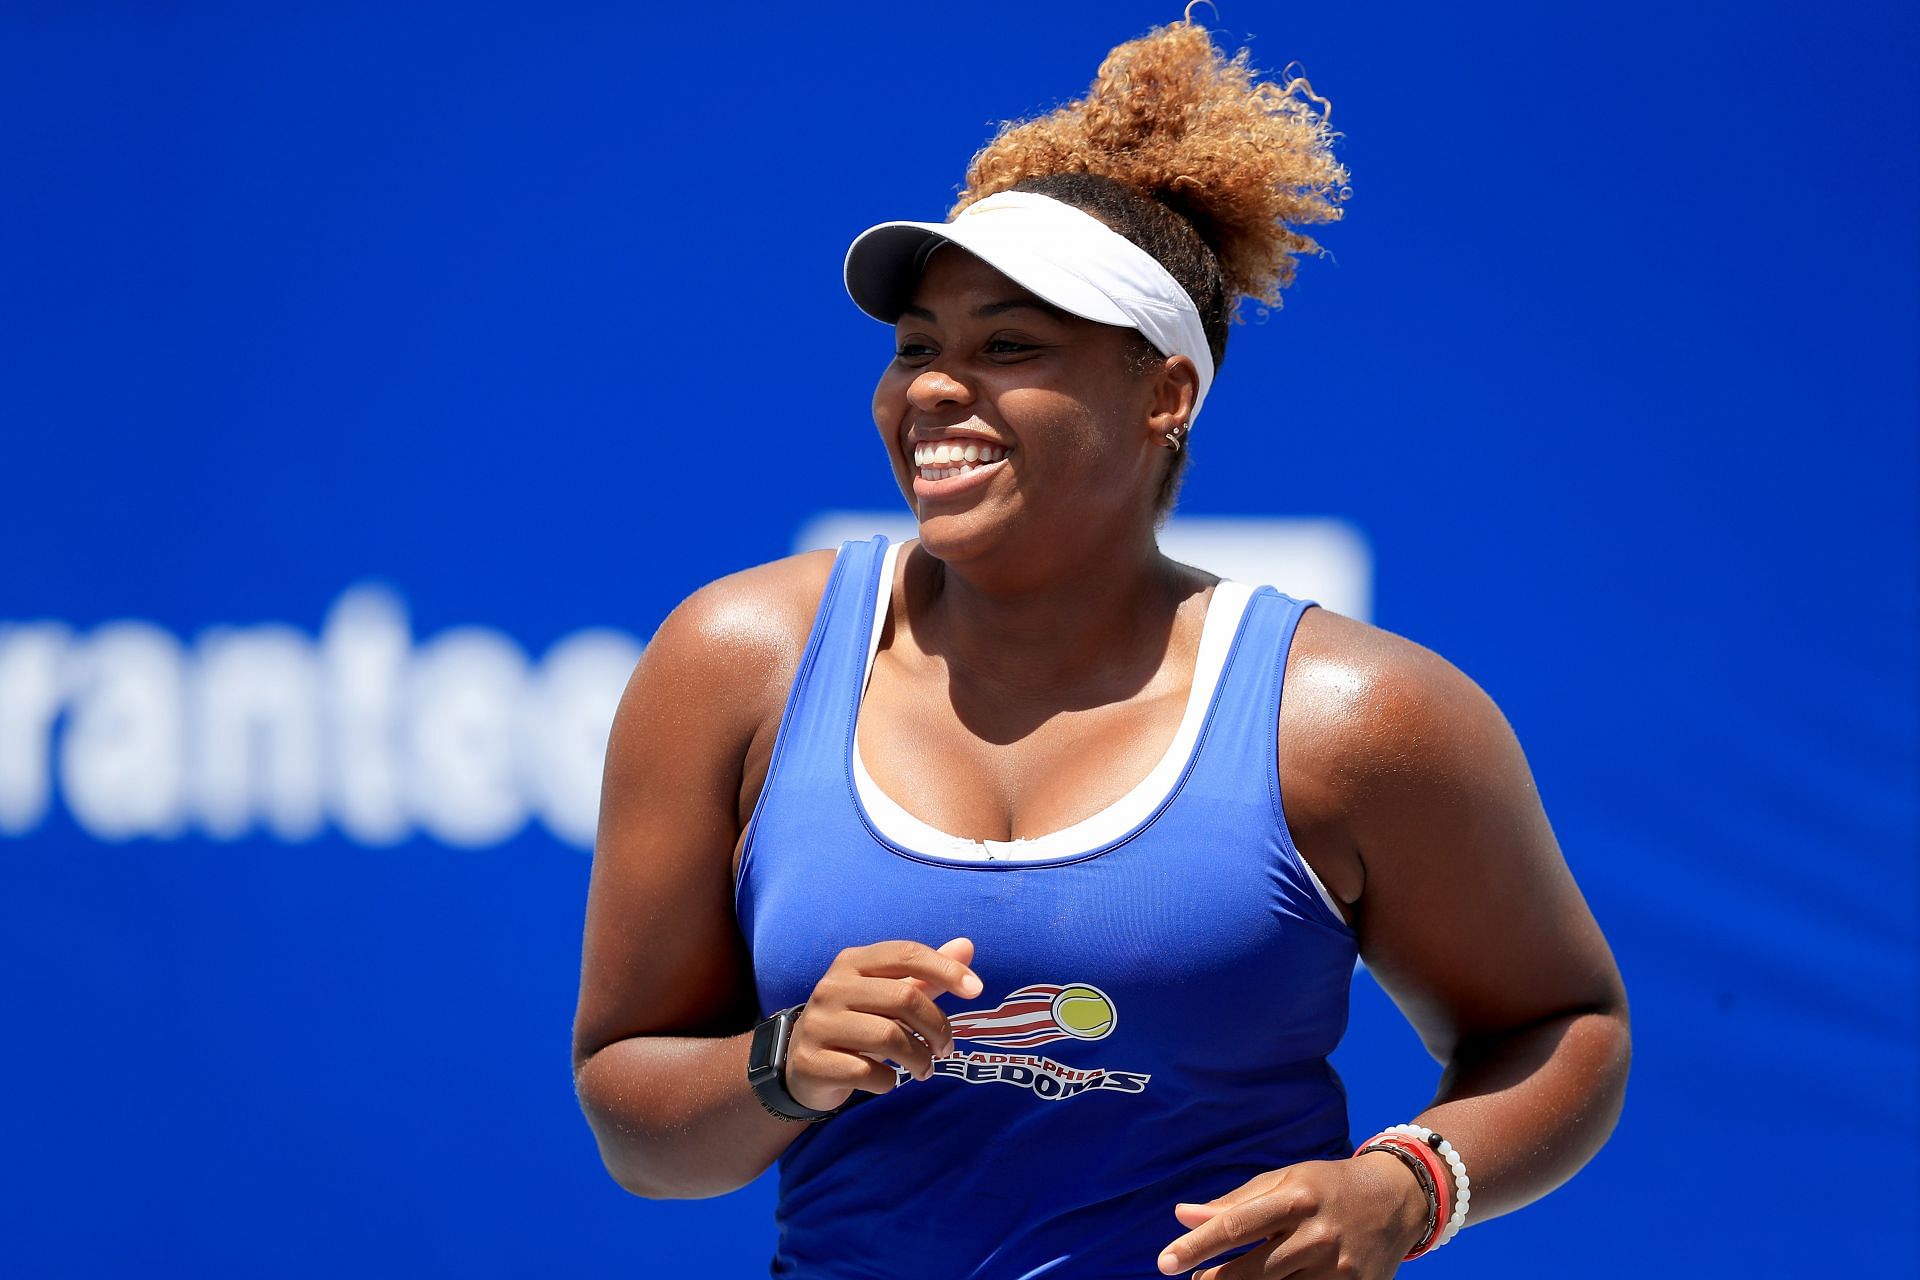 Taylor Townsend at the 2020 World TeamTennis